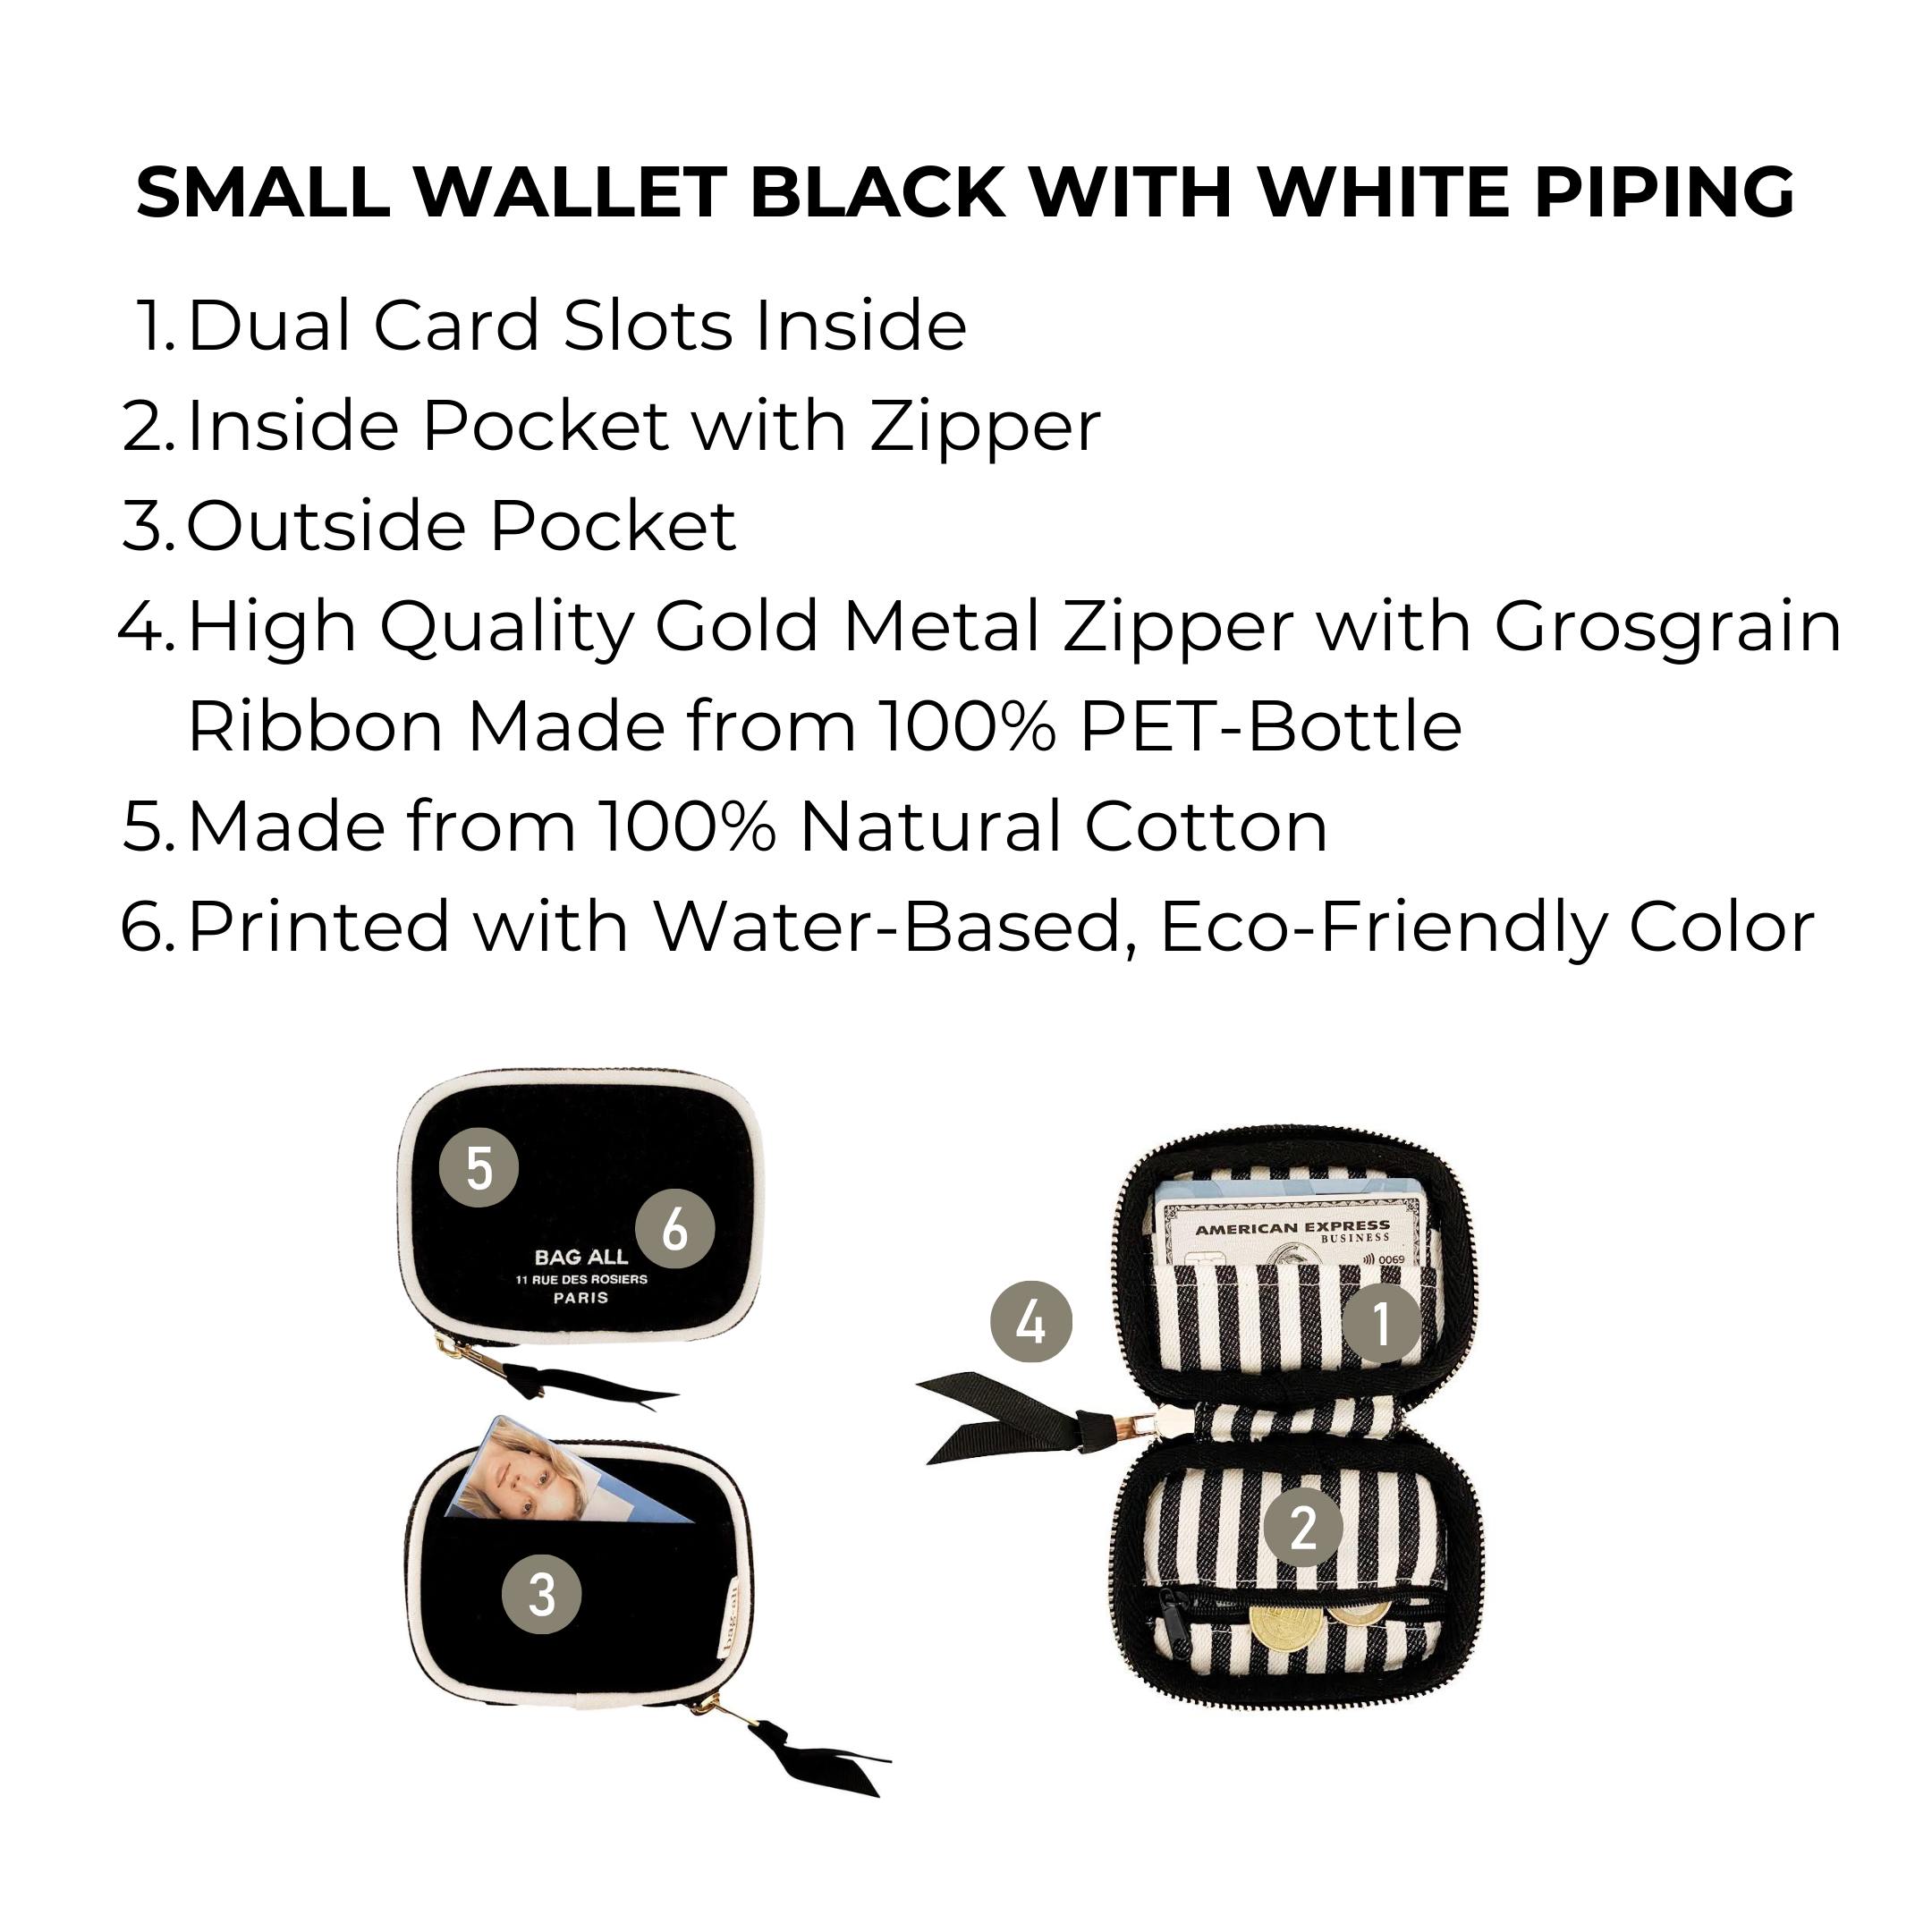 Small Wallet Black with White Piping | Bag-all